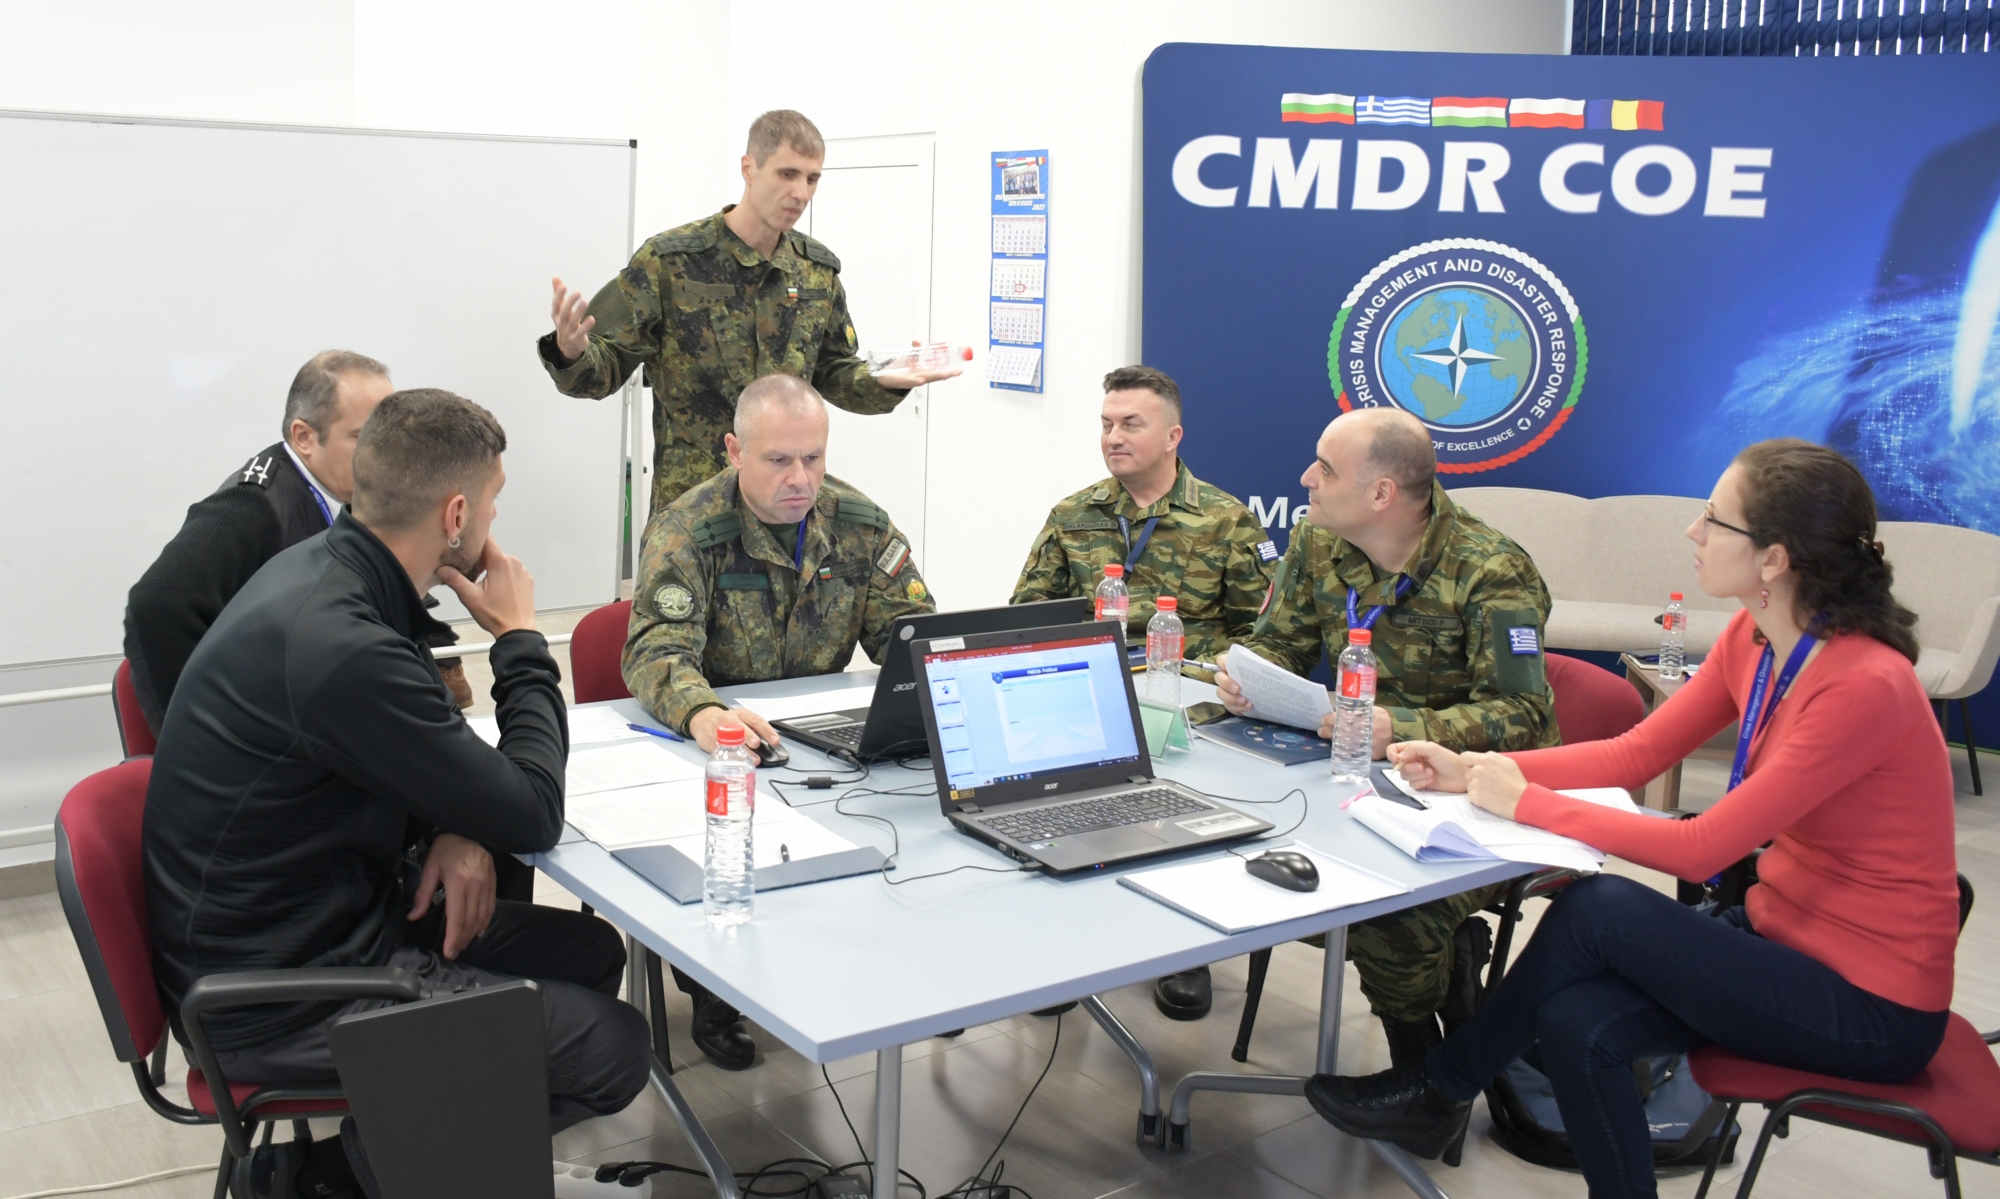 Professionals Conclude Intensive Course on Strategic Decision-Making for Crisis Response Operations